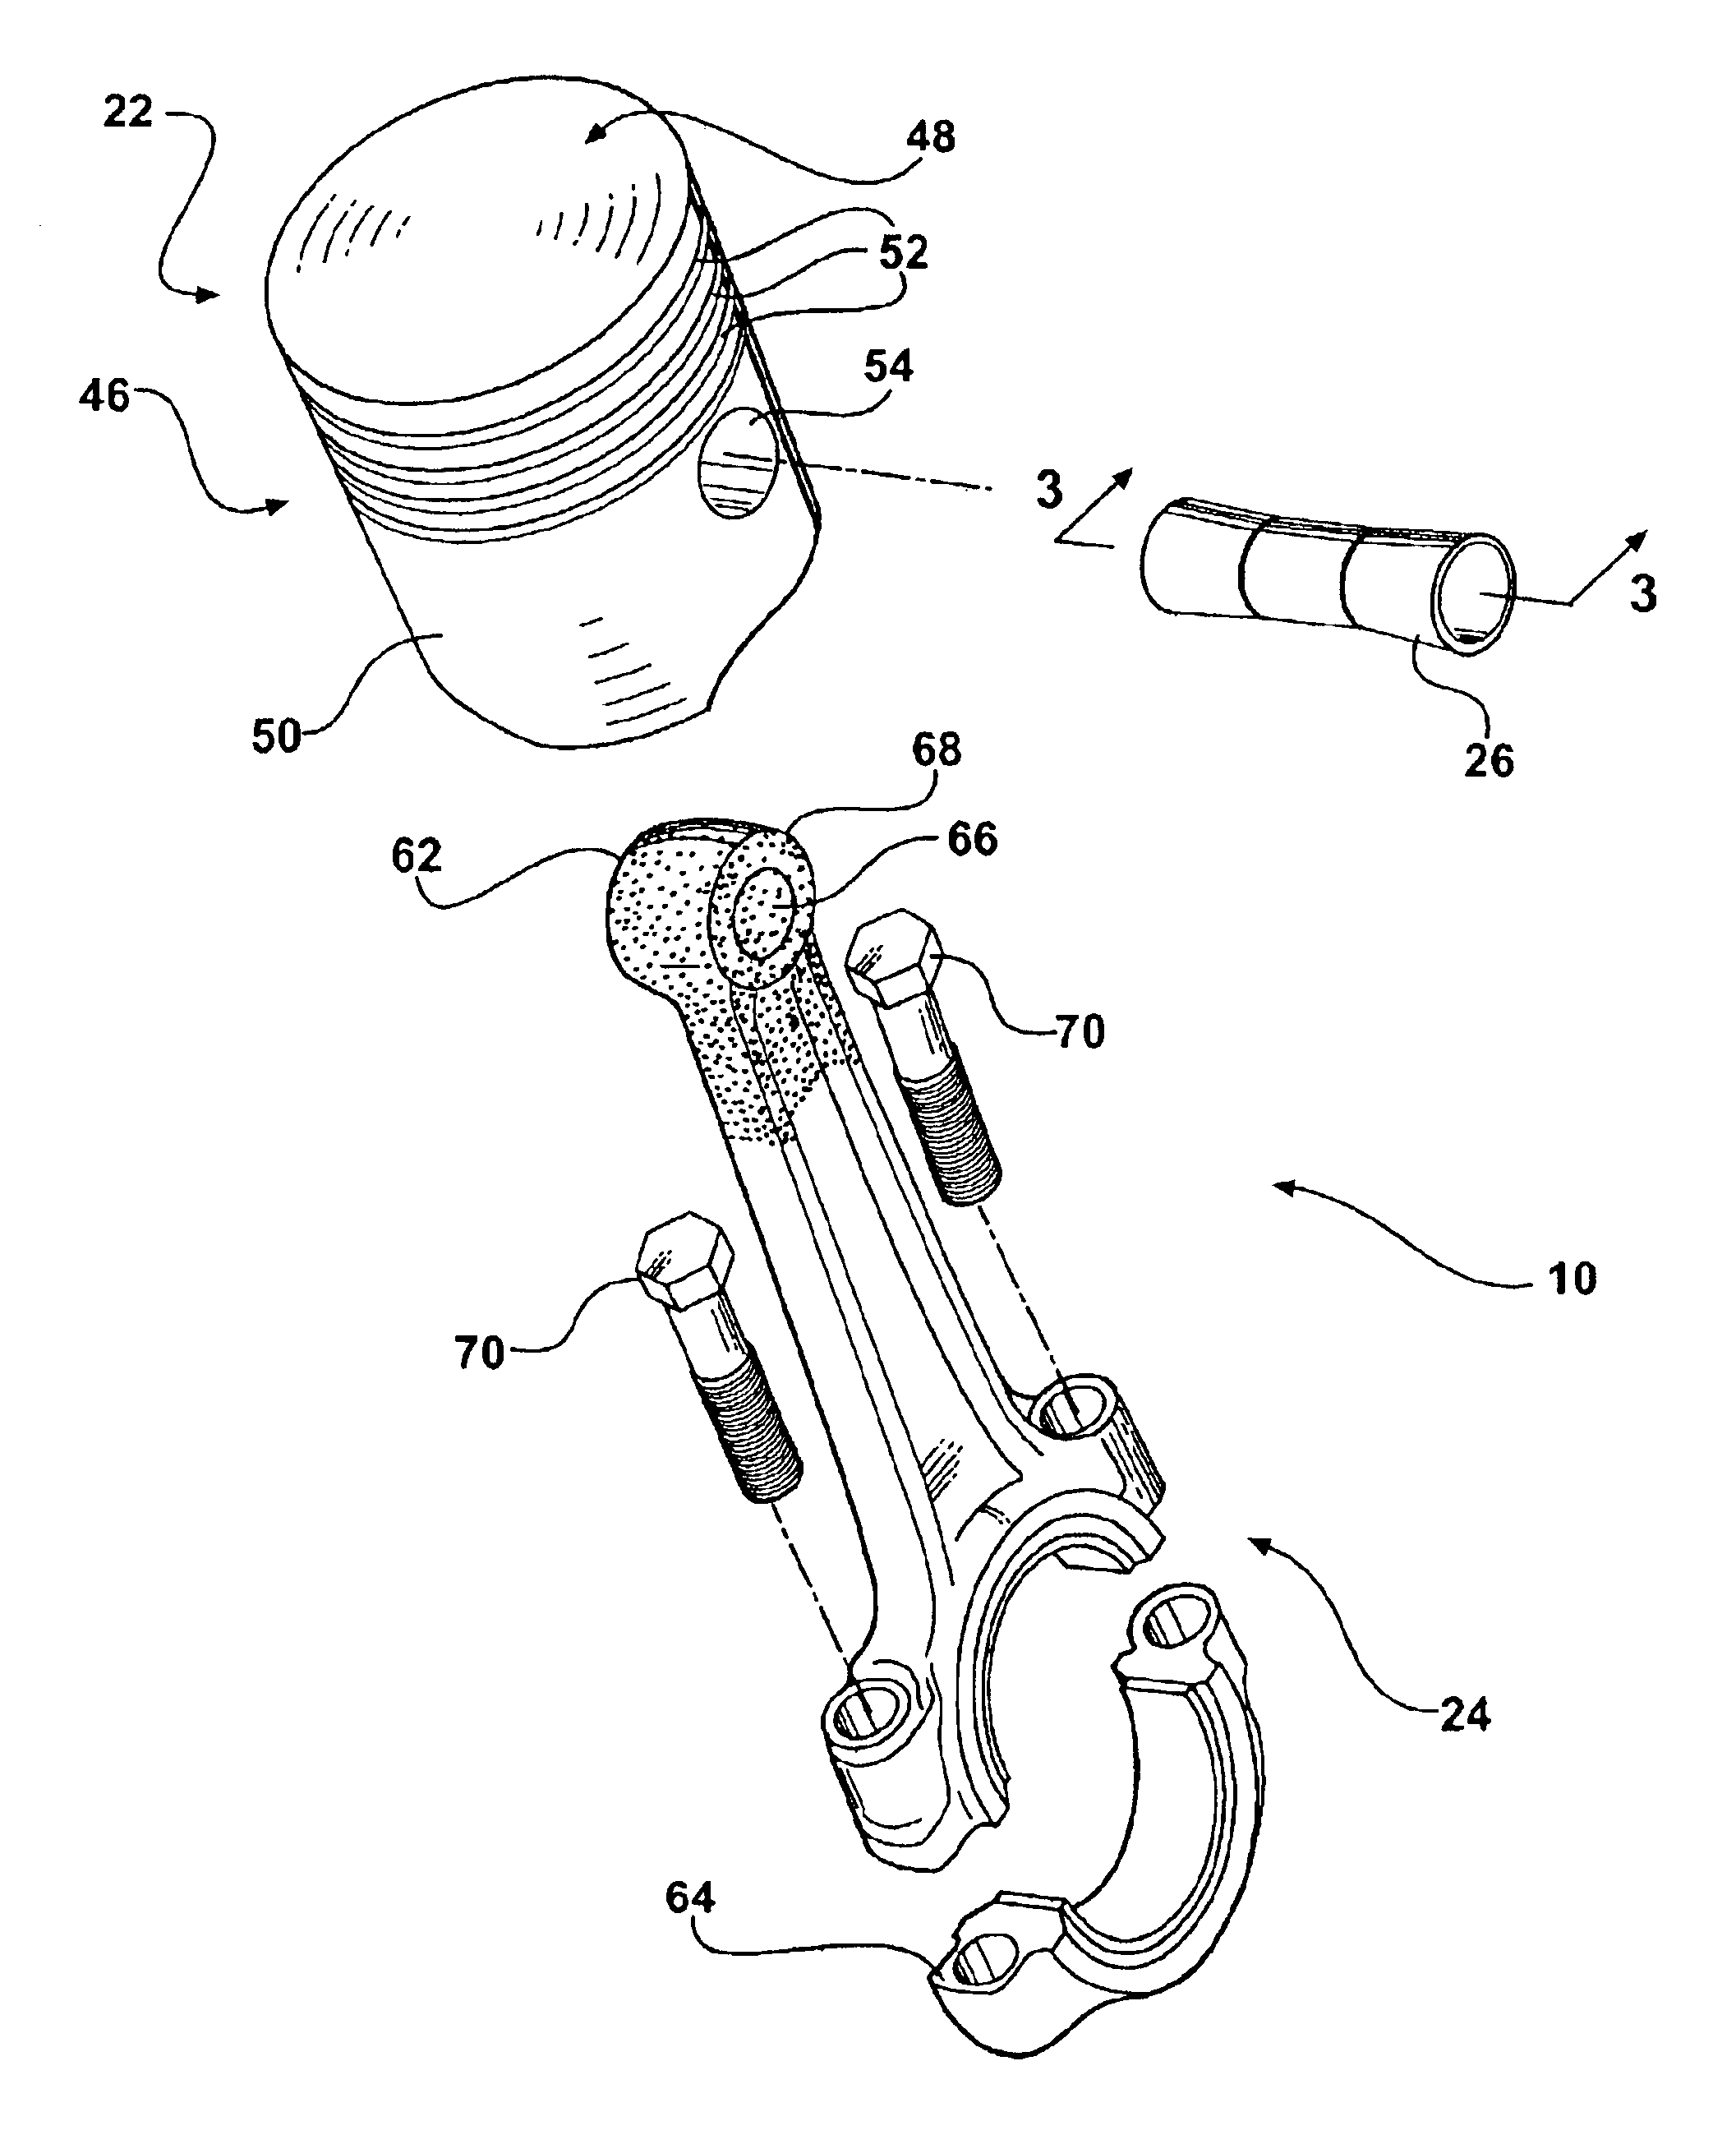 Piston and connecting rod assembly having phosphatized bushingless connecting rod and profiled piston pin